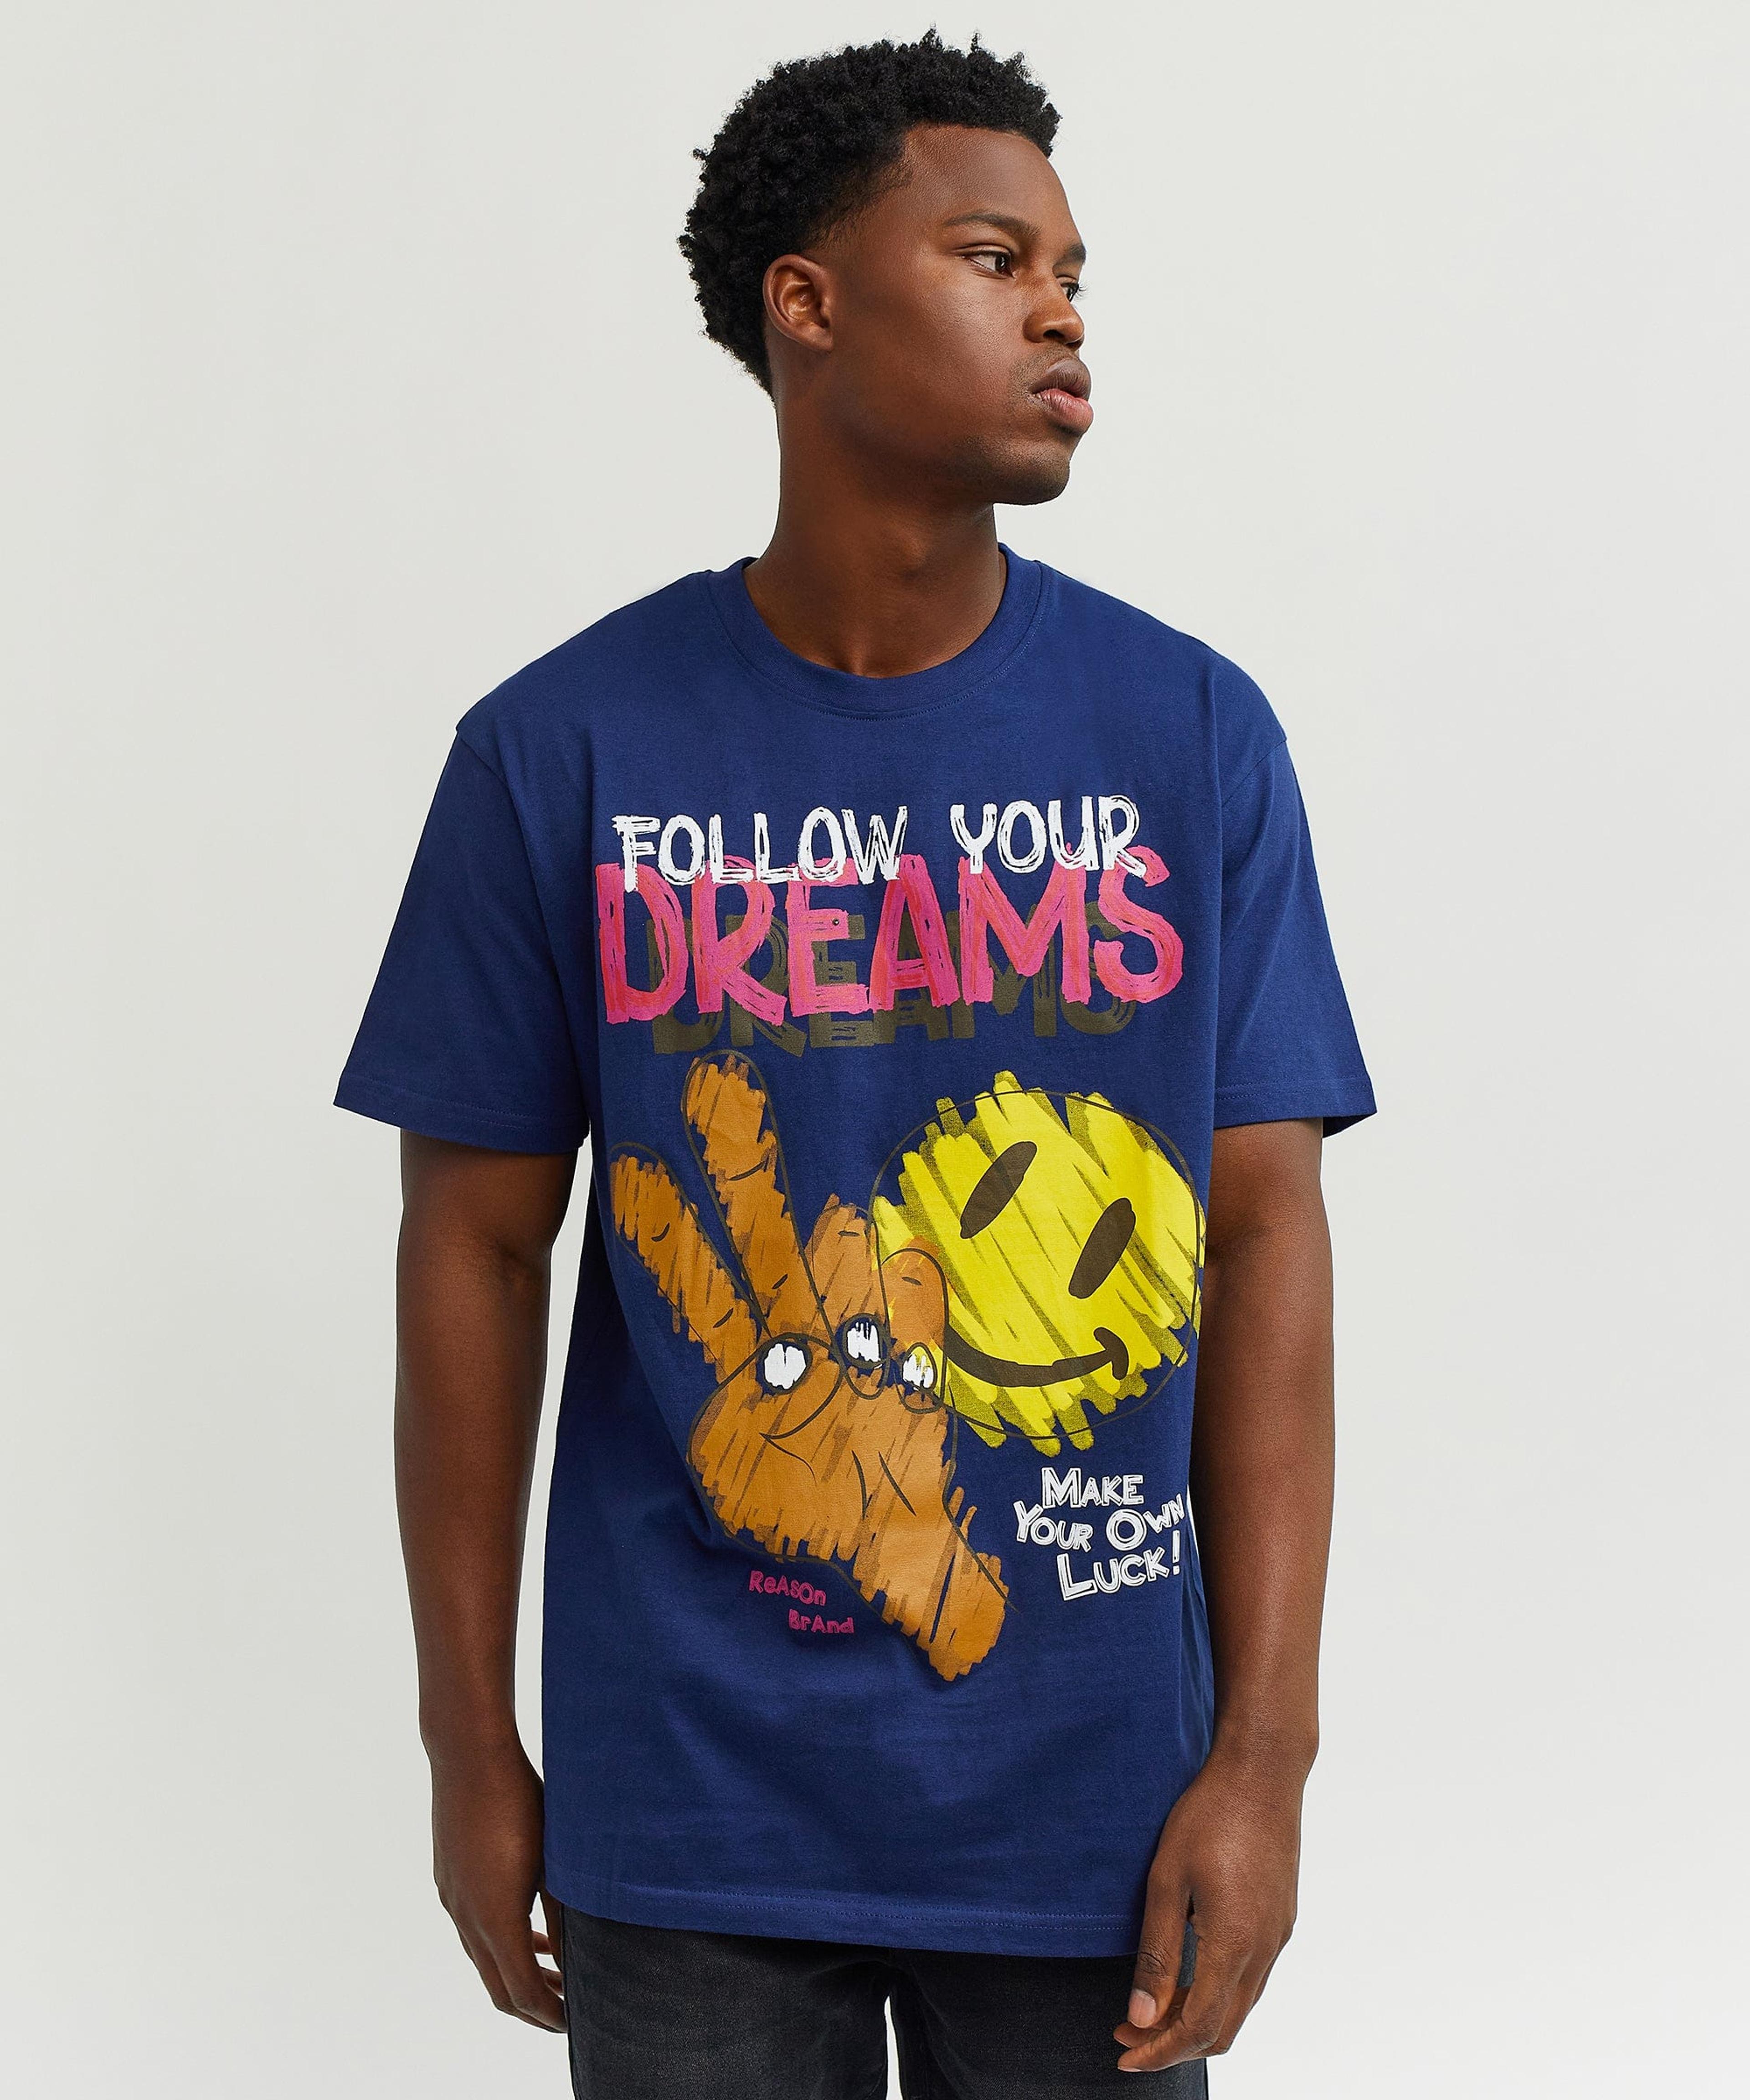 Alternate View 2 of Follow Your Dreams Short Sleeve Tee - Navy